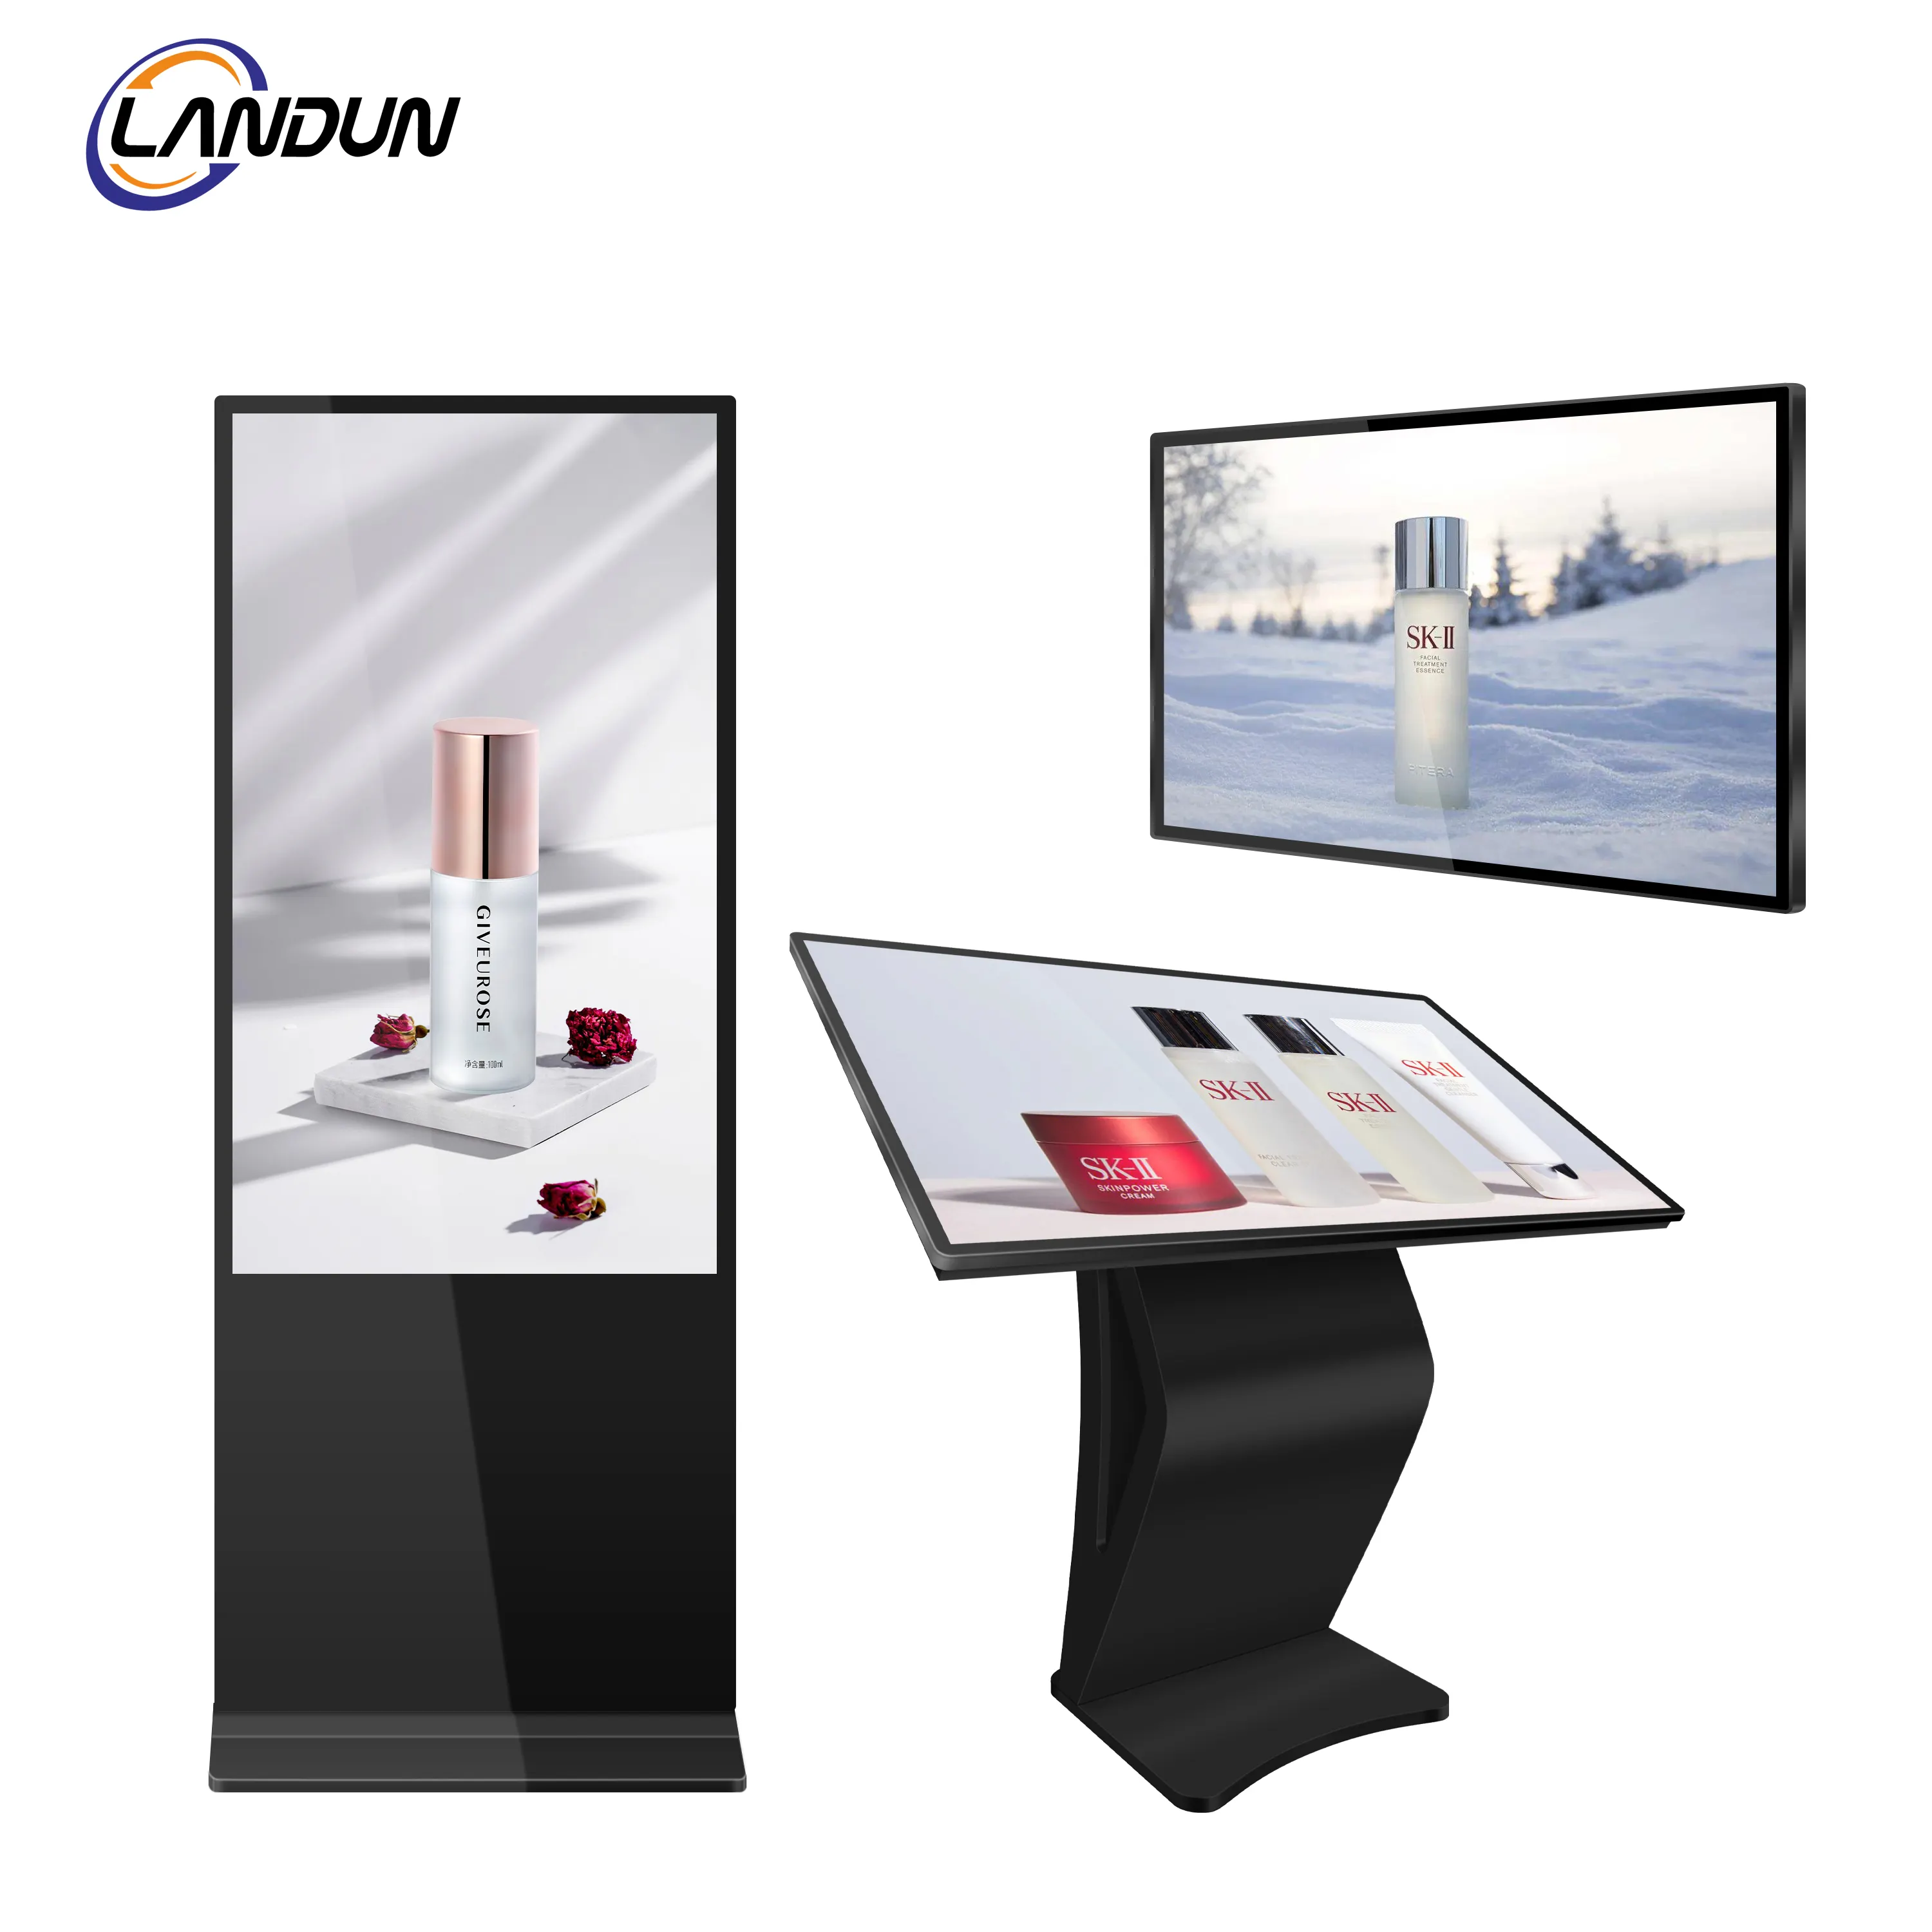 43 Inch Indoor Advertising LCD Touch Screen K-shape Self-service Payment Interactive Screen Display Kiosk